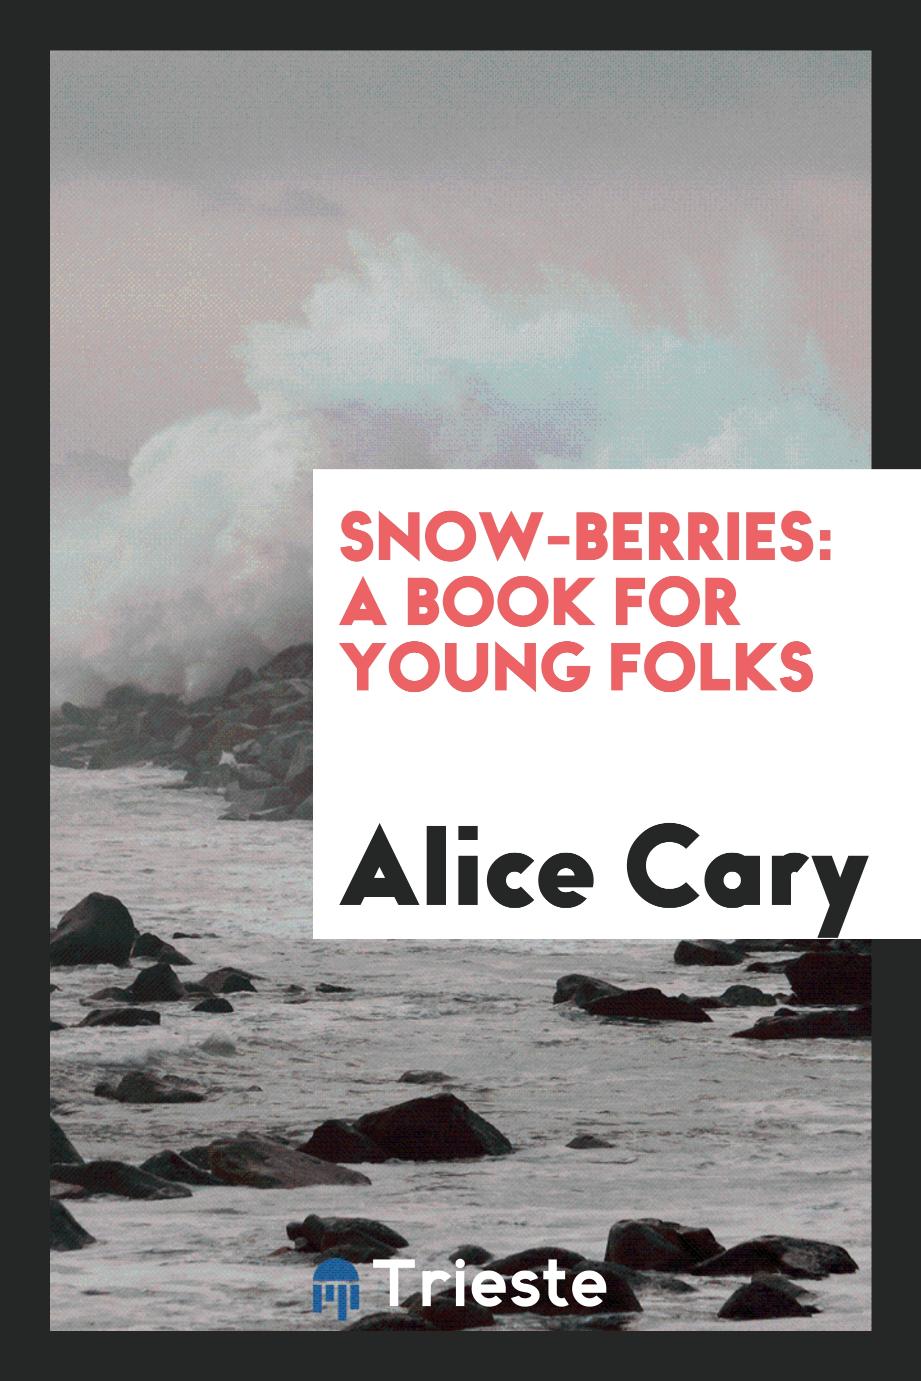 Snow-berries: a book for young folks